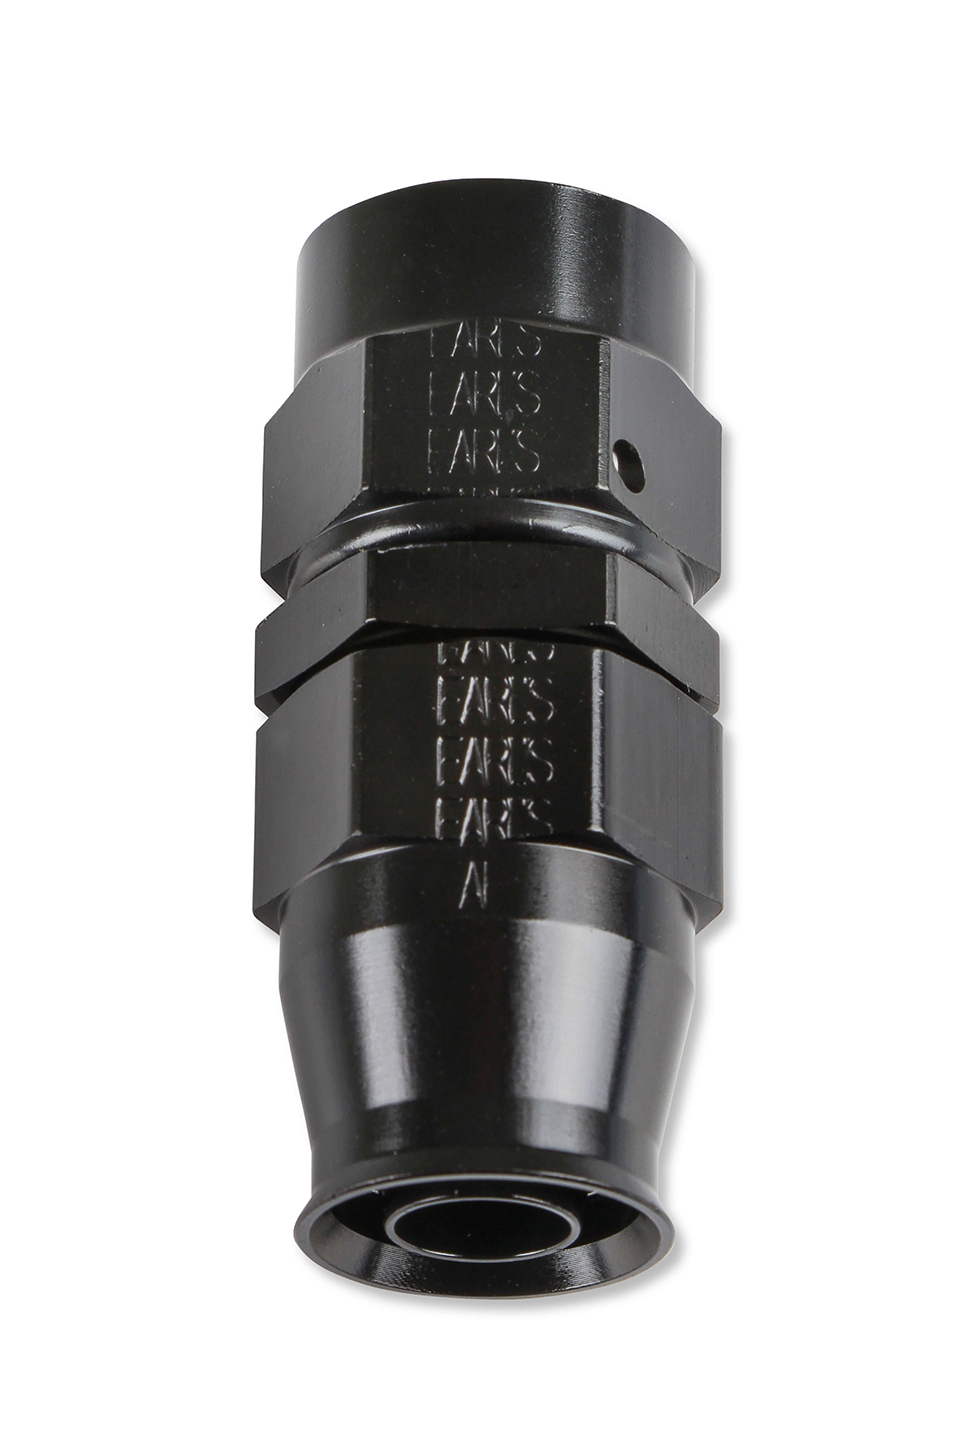 Earls 620112ERL Fitting, Hose End, UltraPro, Straight, 12 AN Hose to 12 AN Female Swivel, Aluminum, Black Anodized, Each